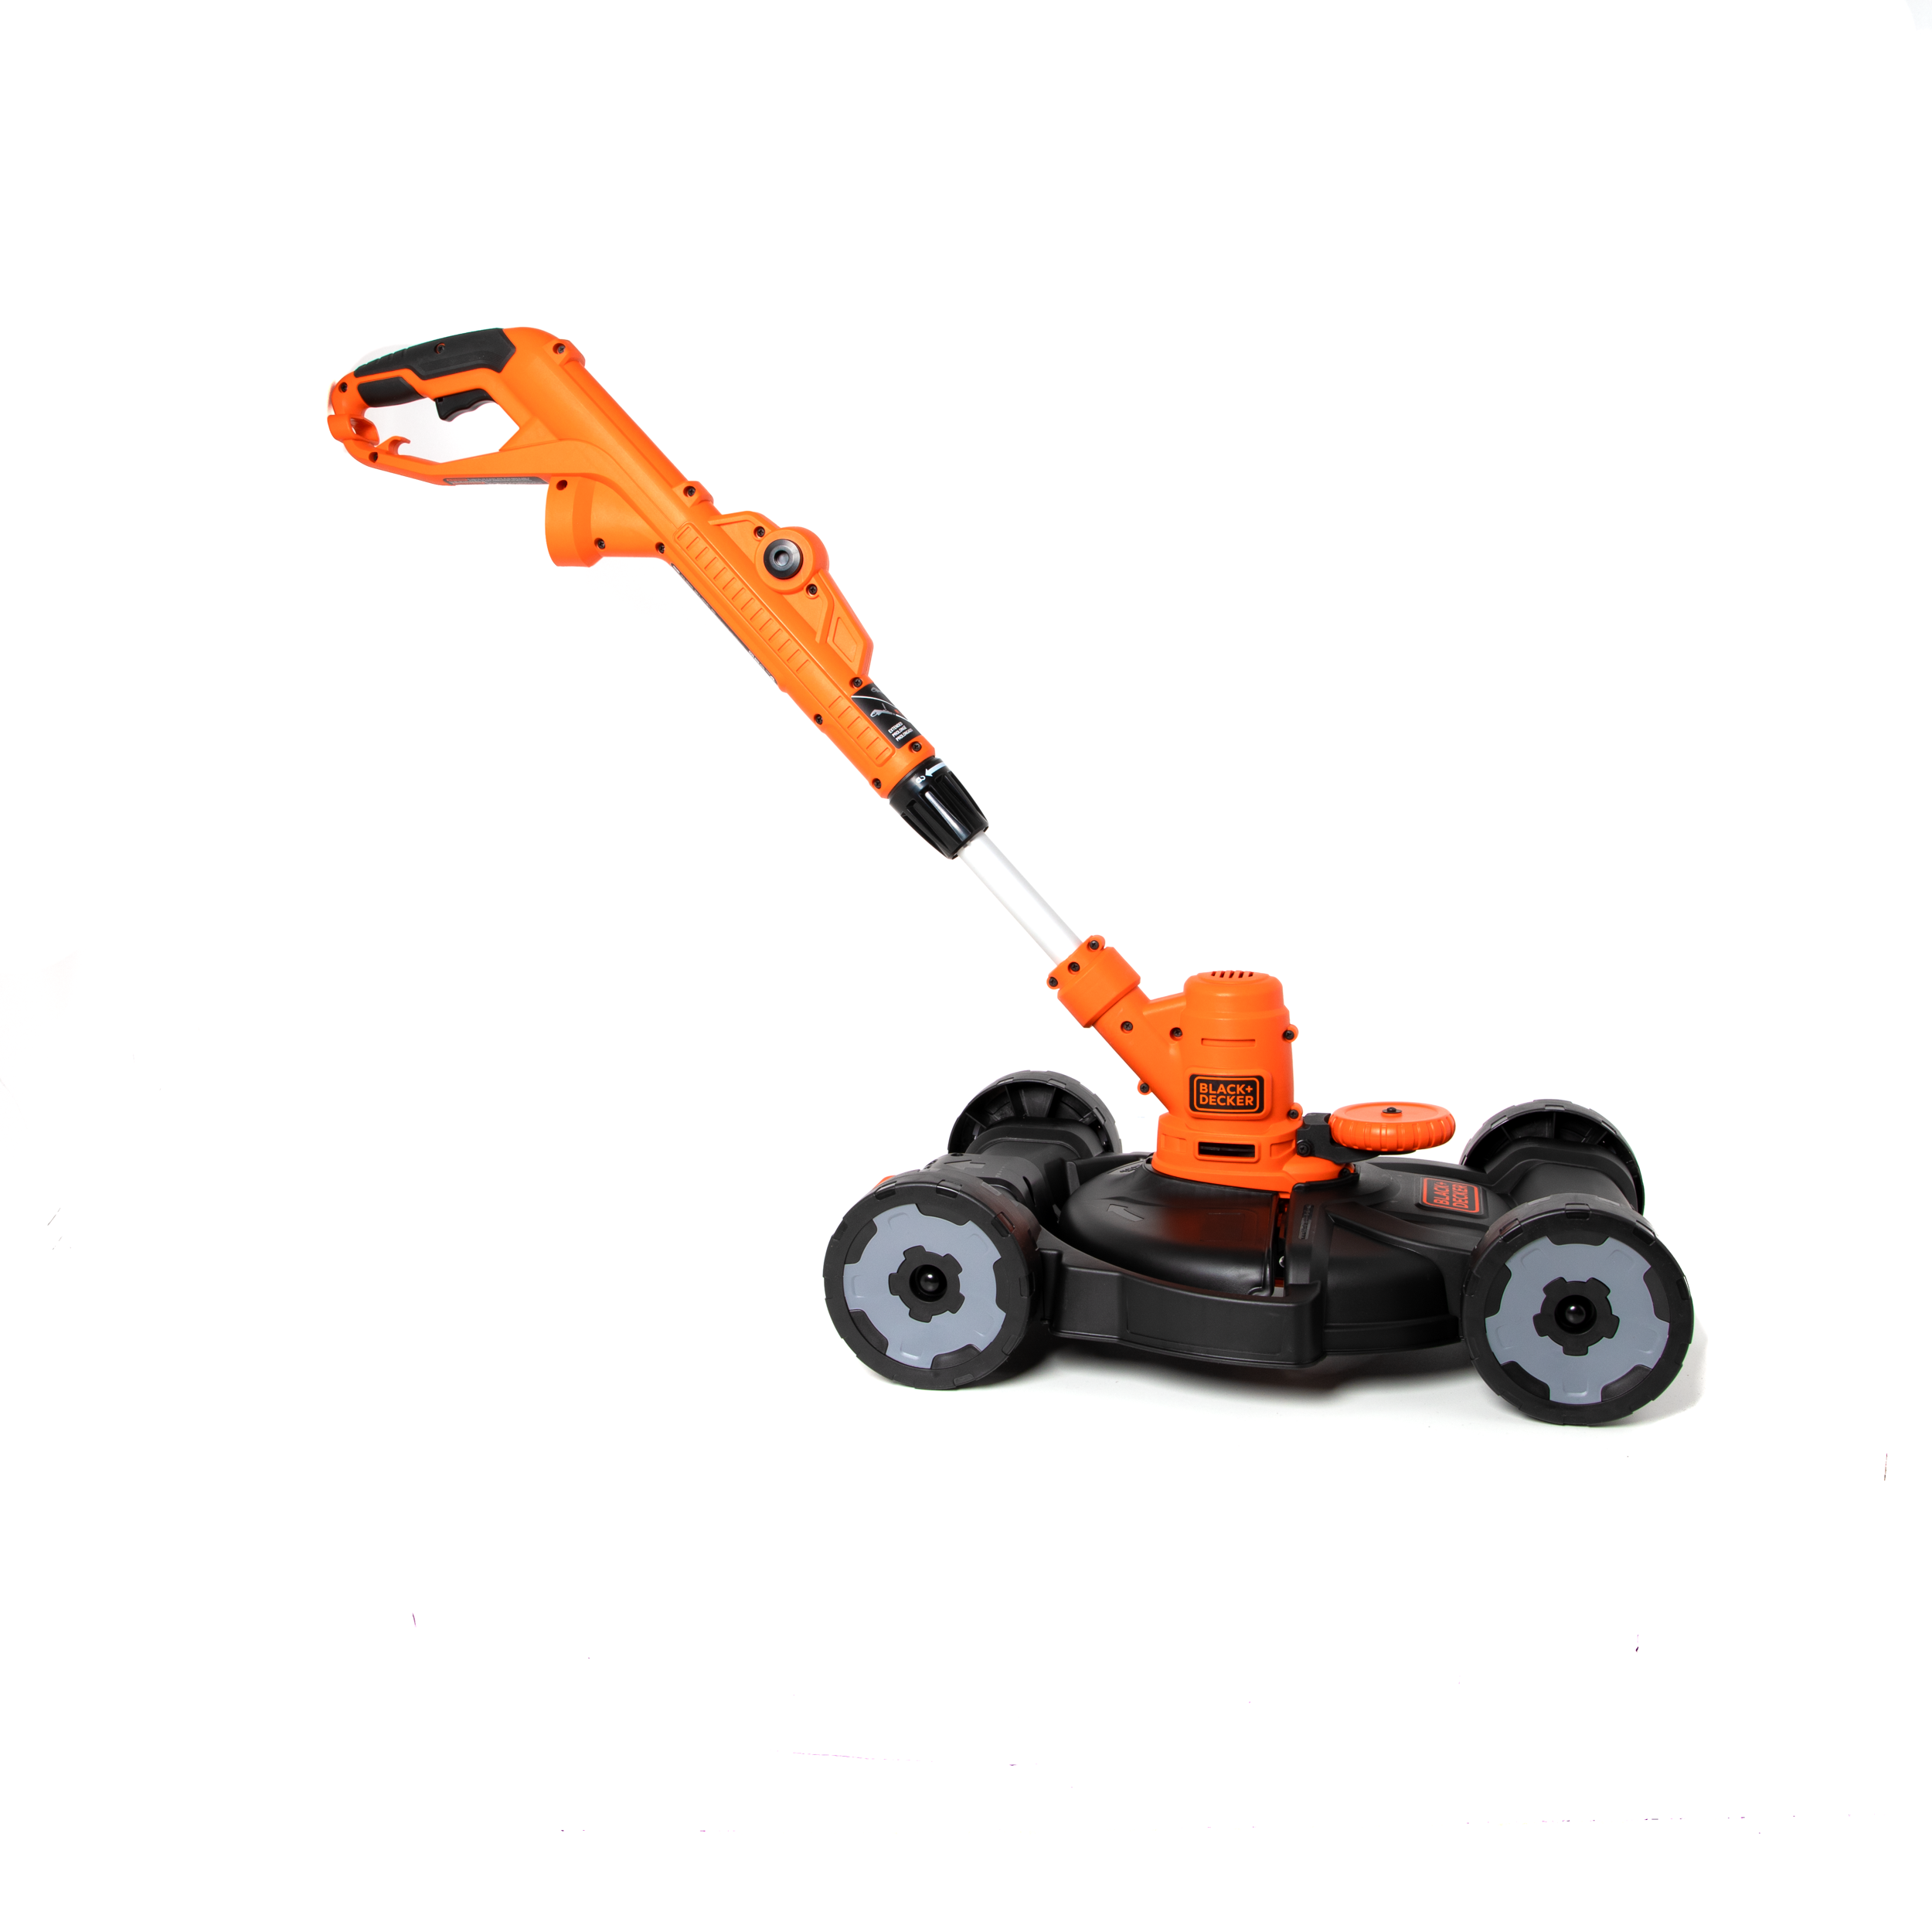 Black & Decker 3-in-1 Corded Electric Lawn Mower String Trimmer Edger 